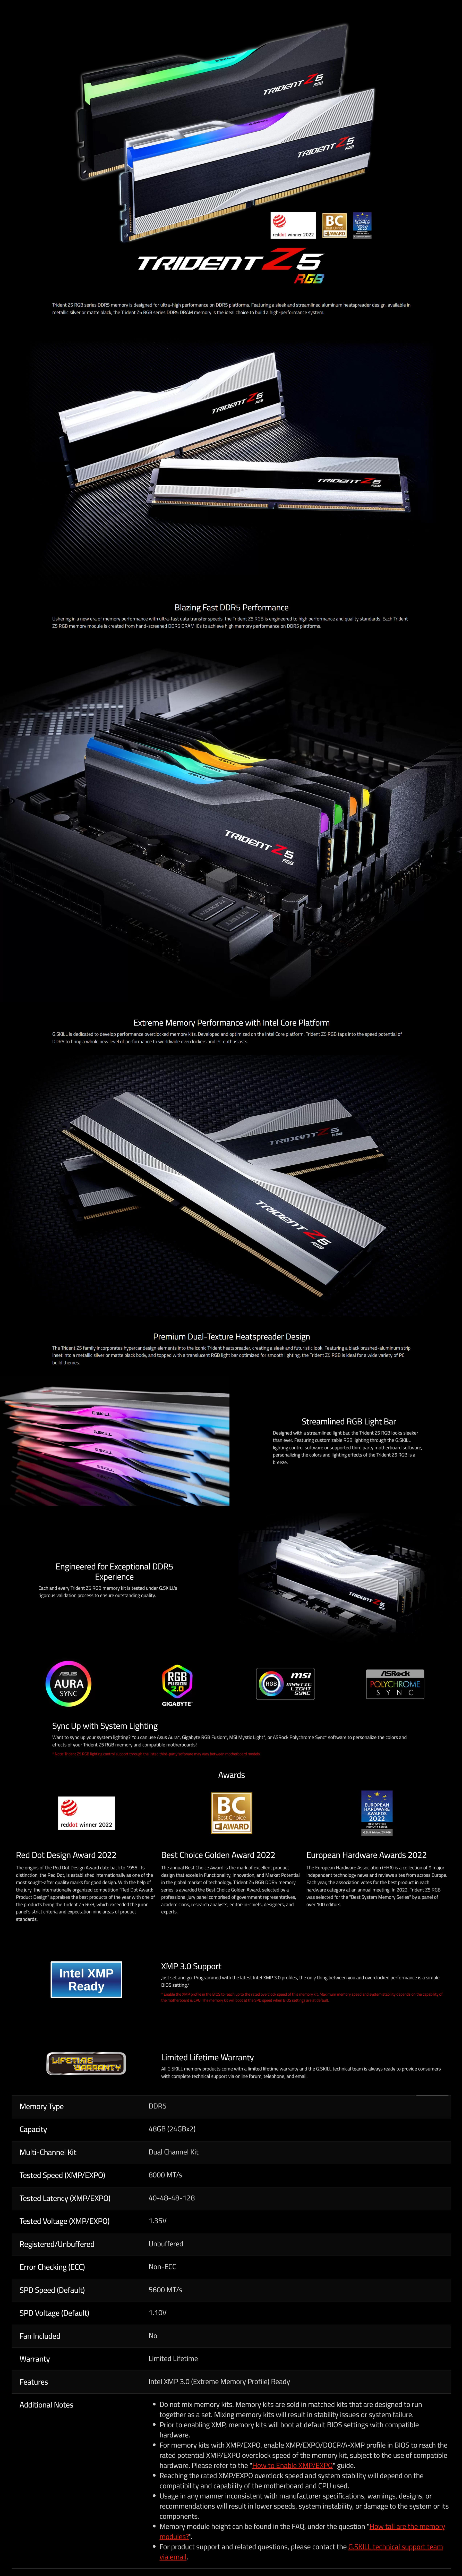 A large marketing image providing additional information about the product G.Skill 48GB Kit (2x24GB) DDR5 Trident Z5 RGB C40 8000MHz - Silver - Additional alt info not provided